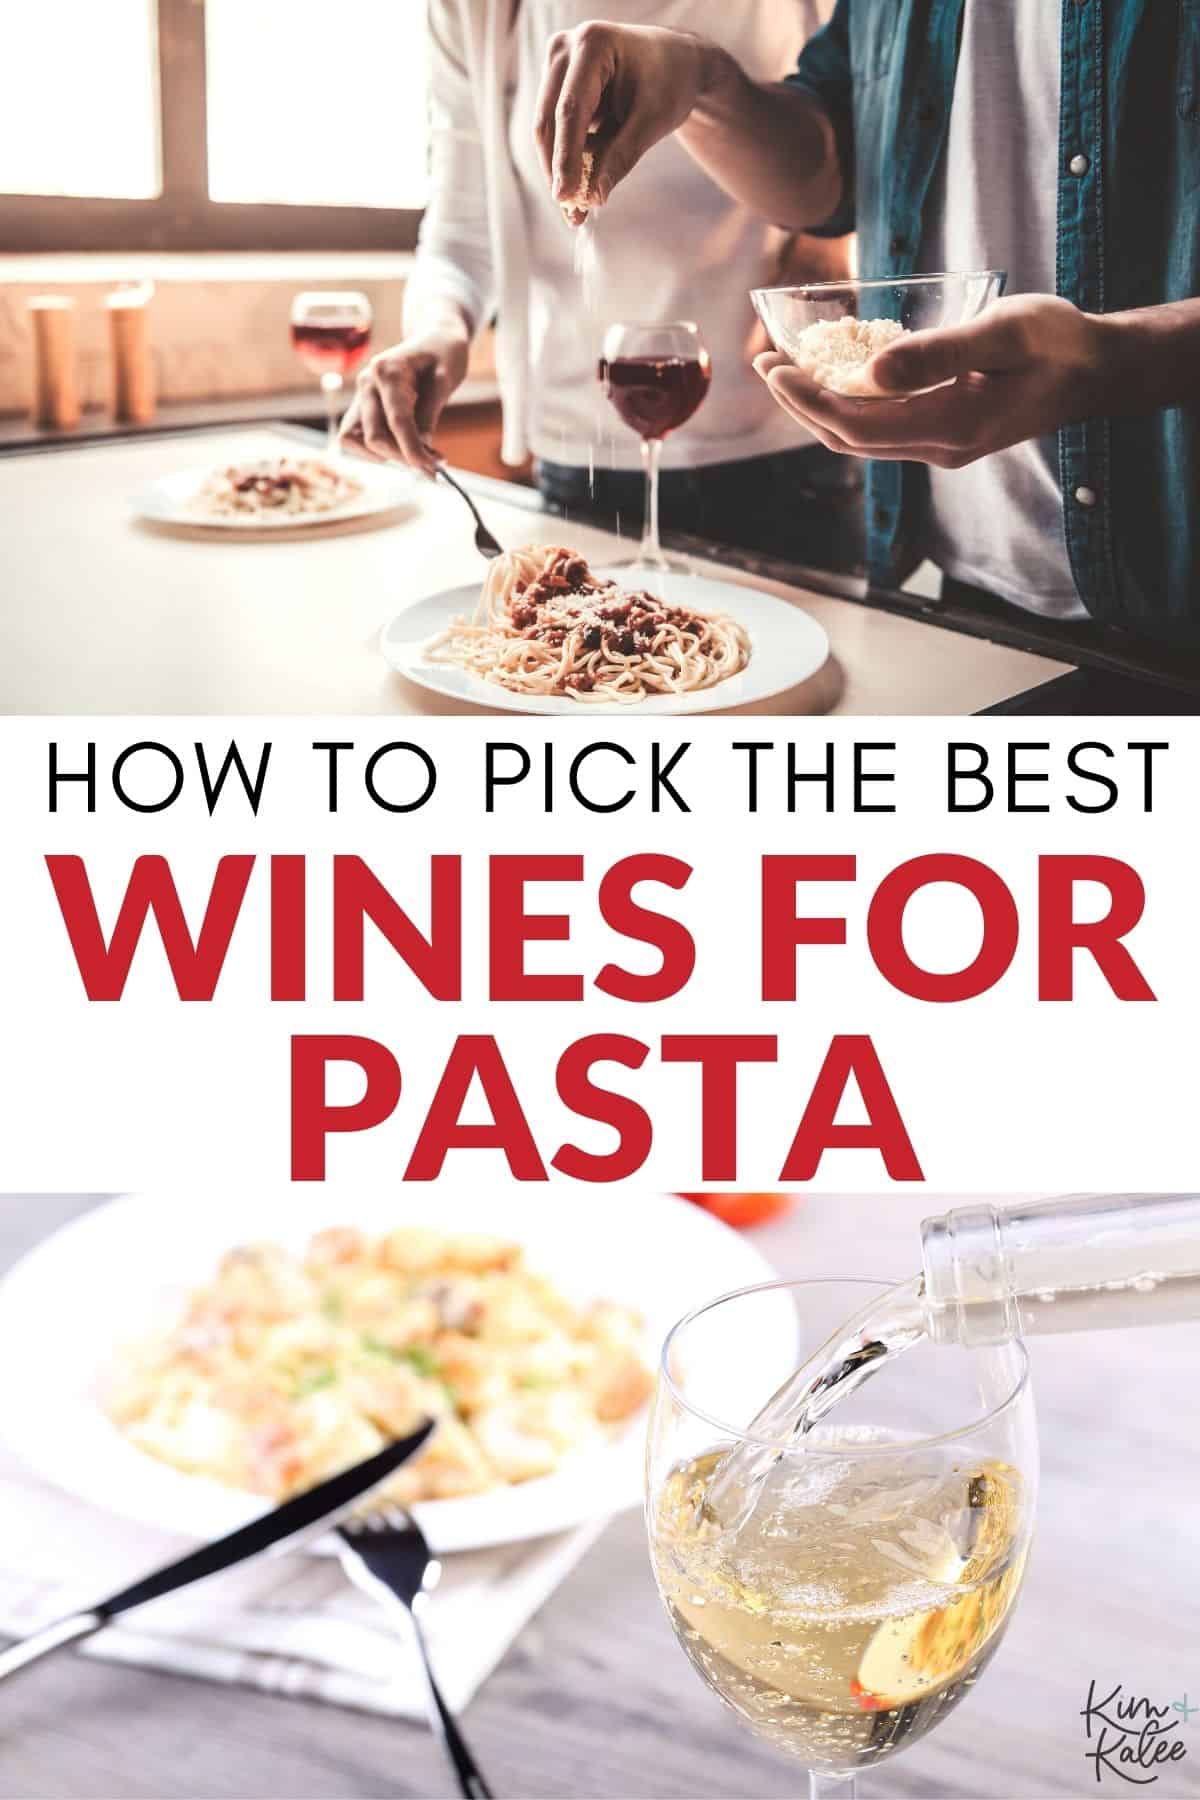 collage of a couple pouring red wine with pasta and a glass of white wine with pasta - text overlay "How to Pick the Best Wines for Pasta"